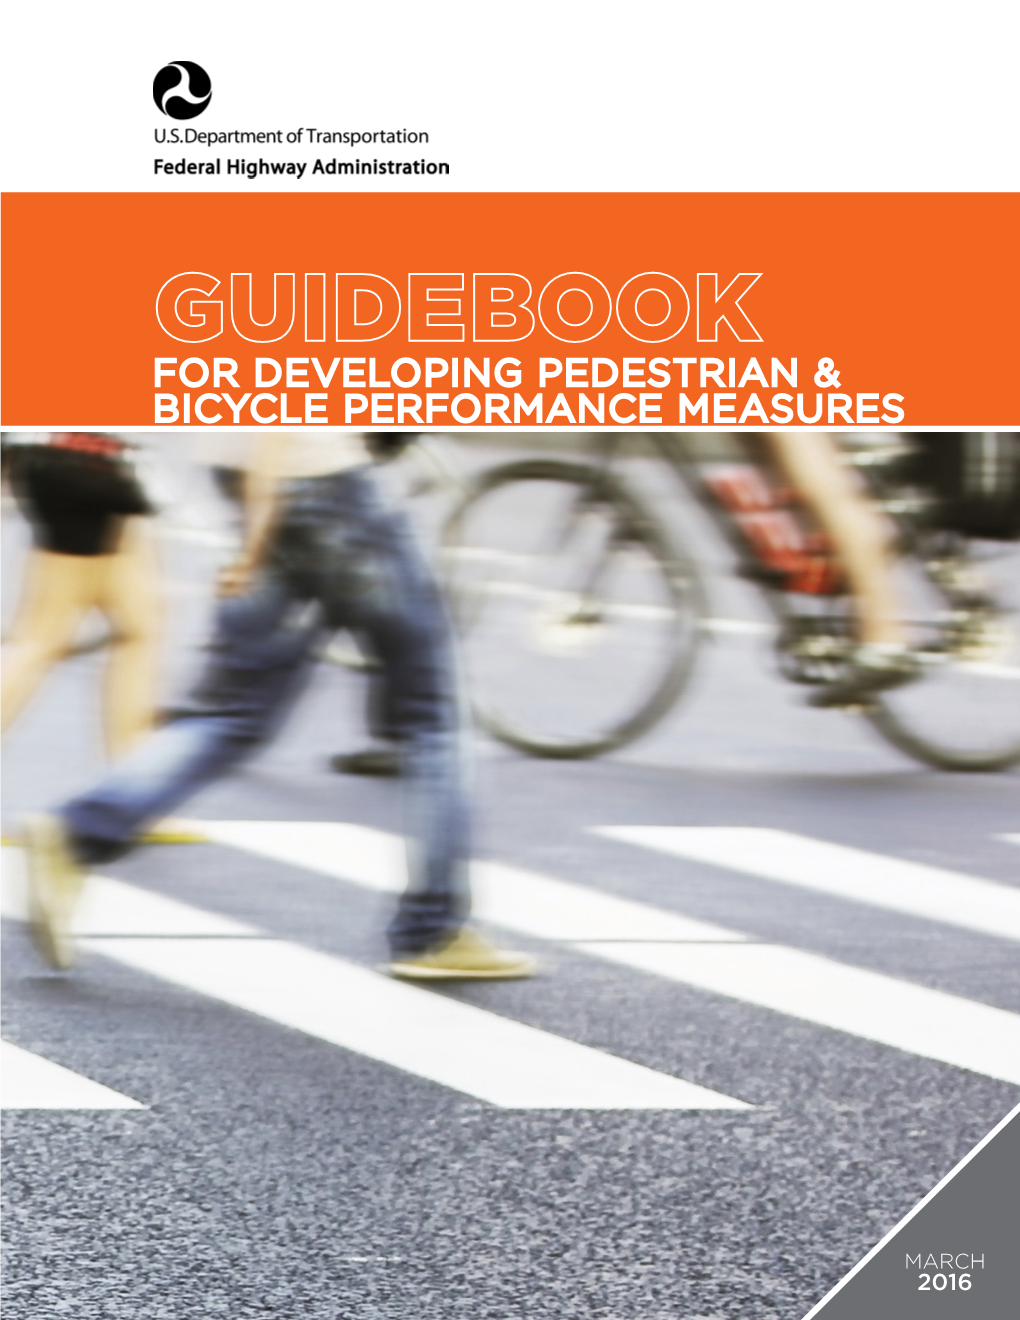 For Developing Pedestrian & Bicycle Performance